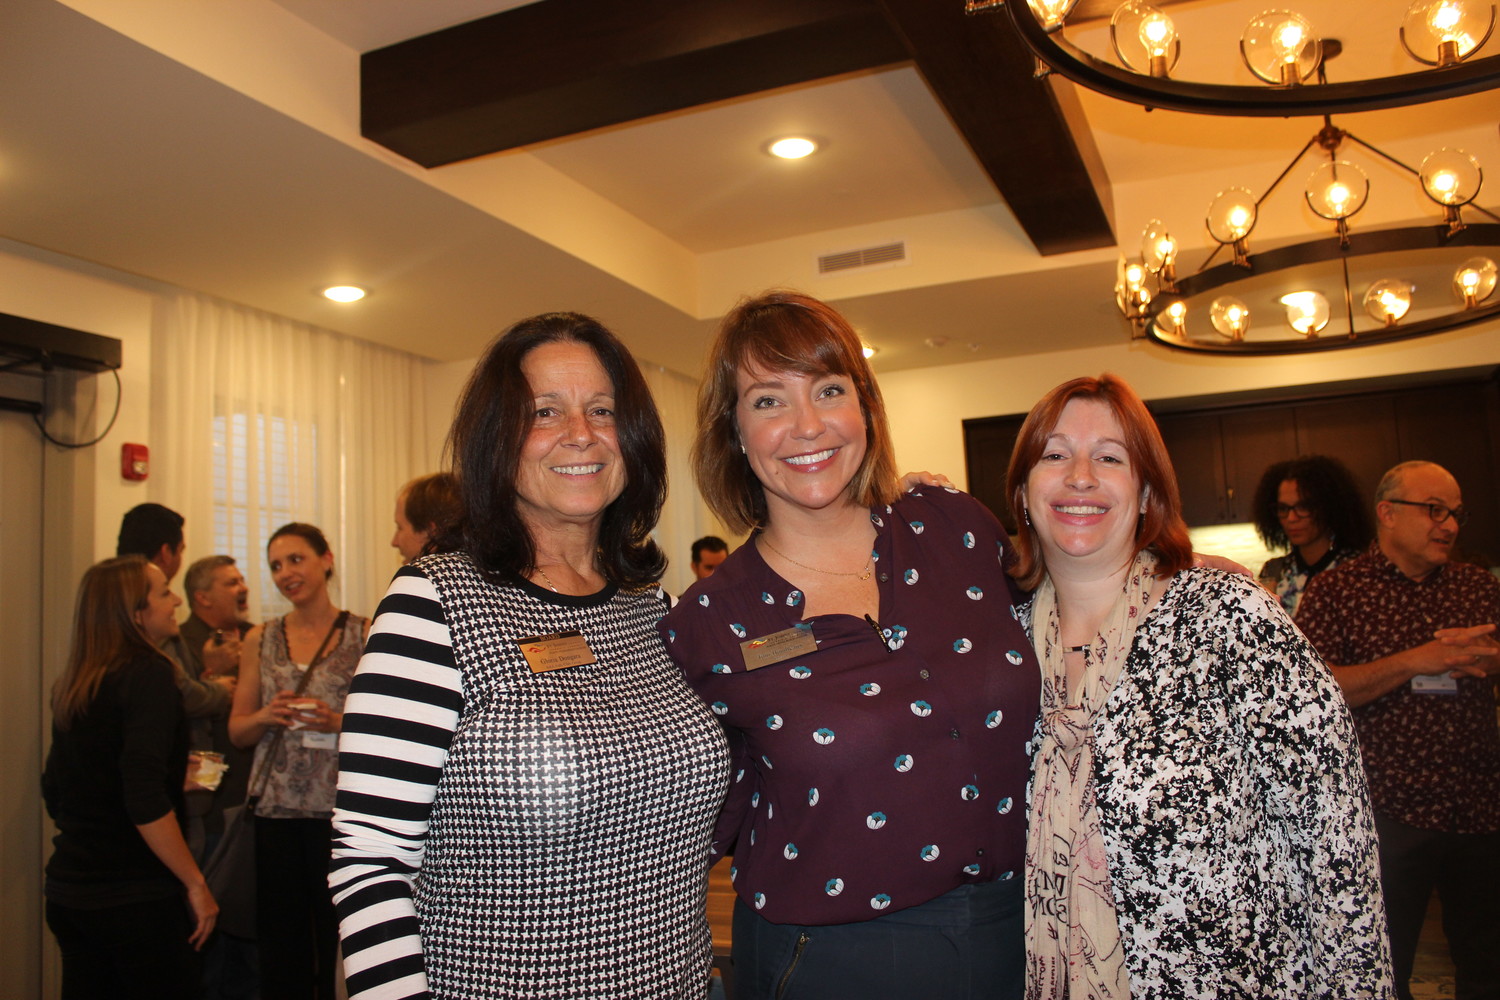 Gloria Dongara, Toni Boudreaux and Kari Zerrahn pose for a photo at the Chamber “After Hours” event held at Starling at Nocatee on Feb. 28.